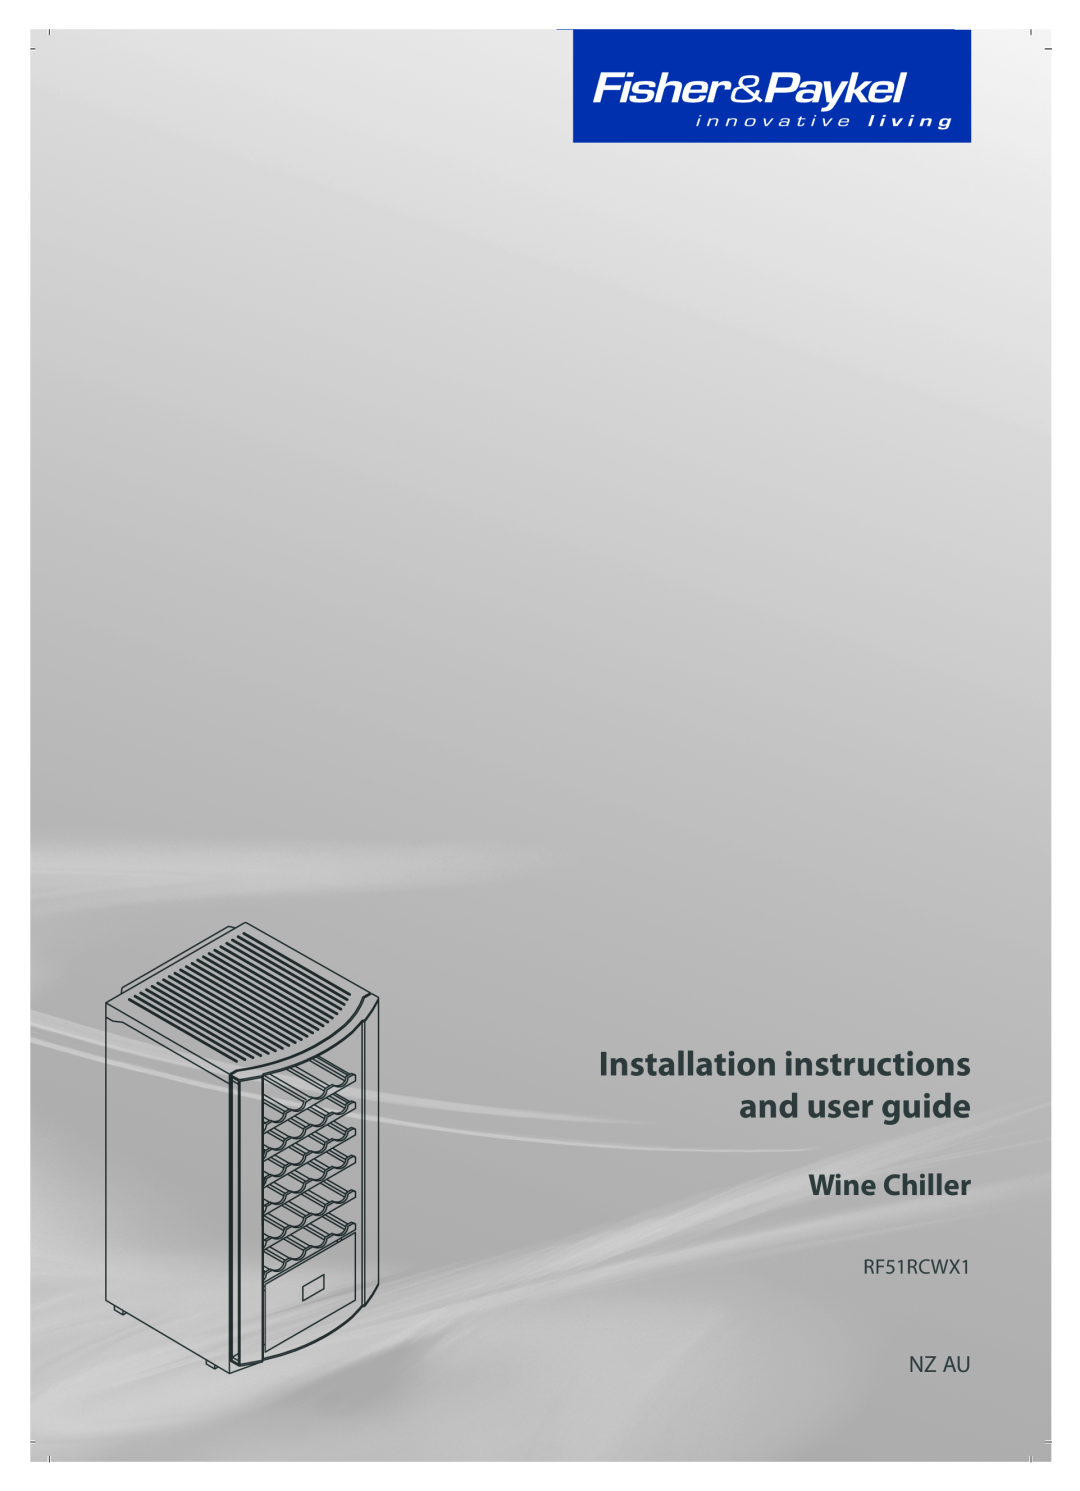 Fisher & Paykel RF51RCWX1 installation instructions Installation instructions, Installationinstructions anduserguide 